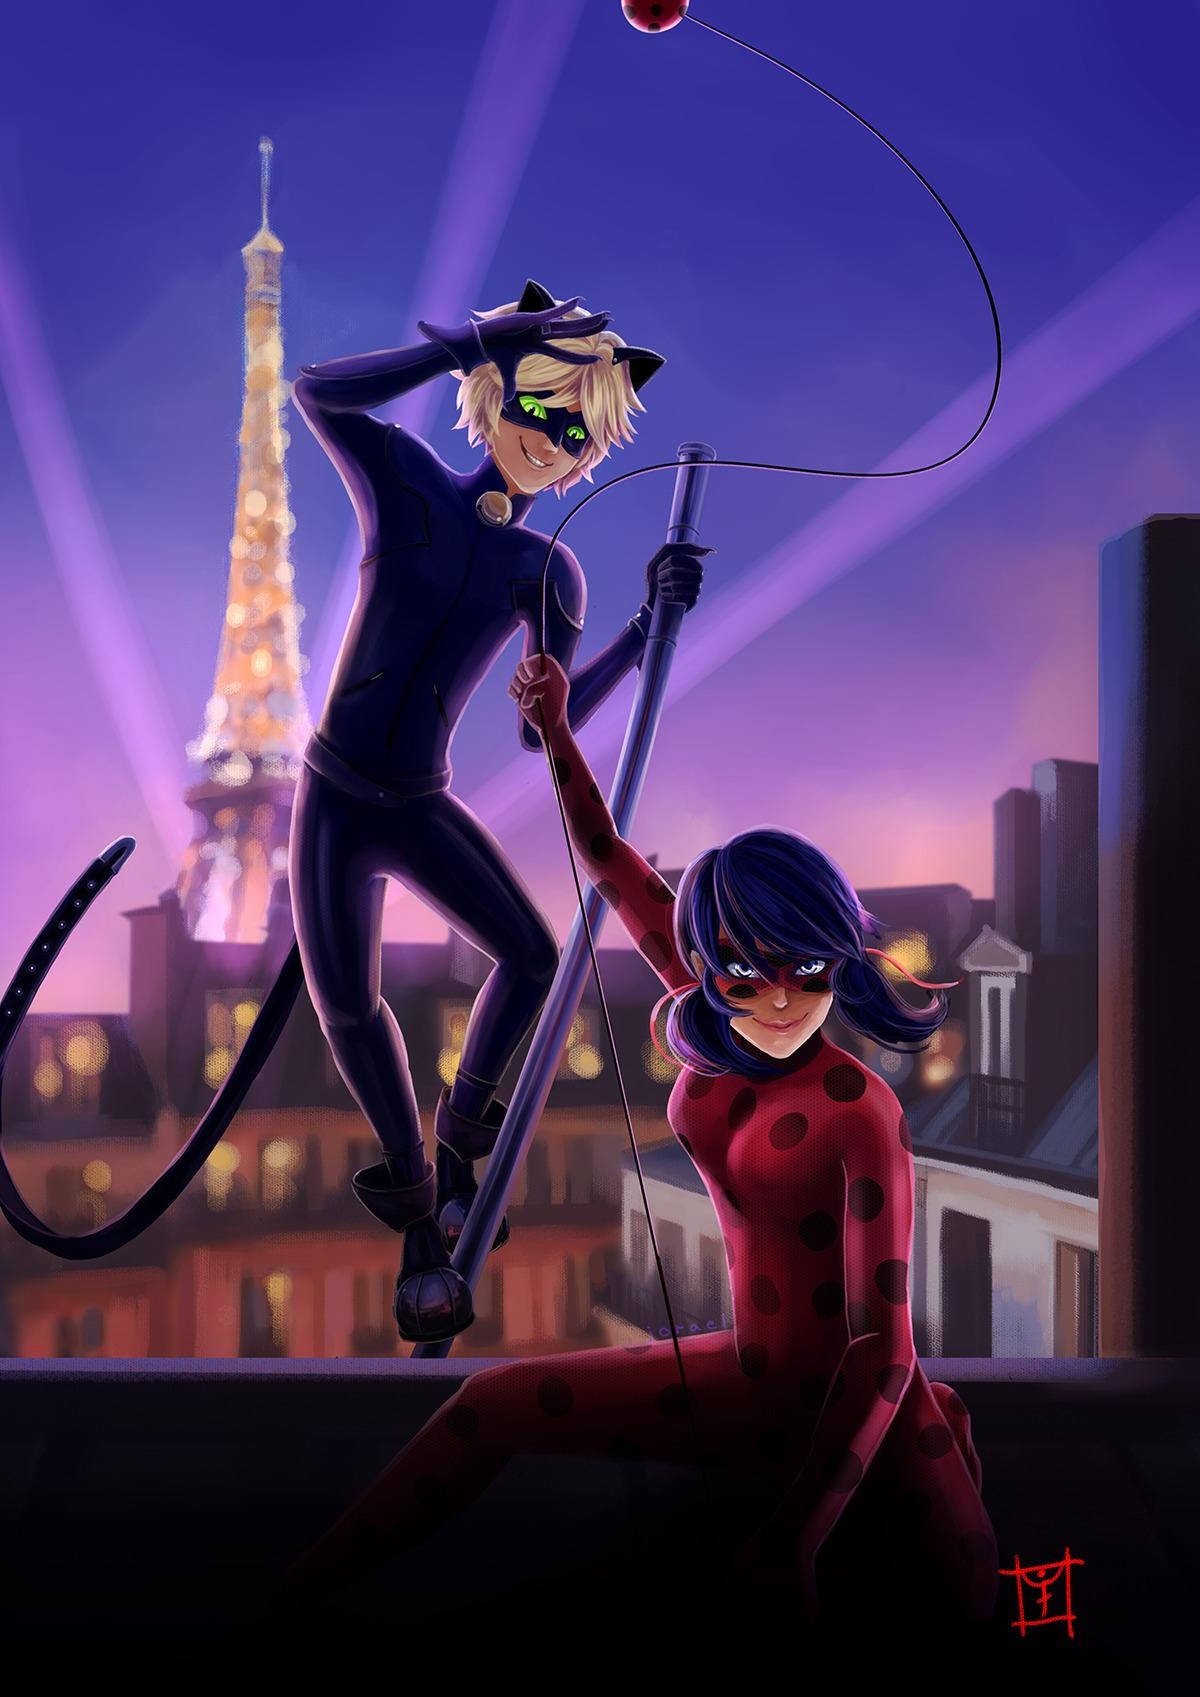 Ladybug And Cat Noir Action Poses In Paris Background